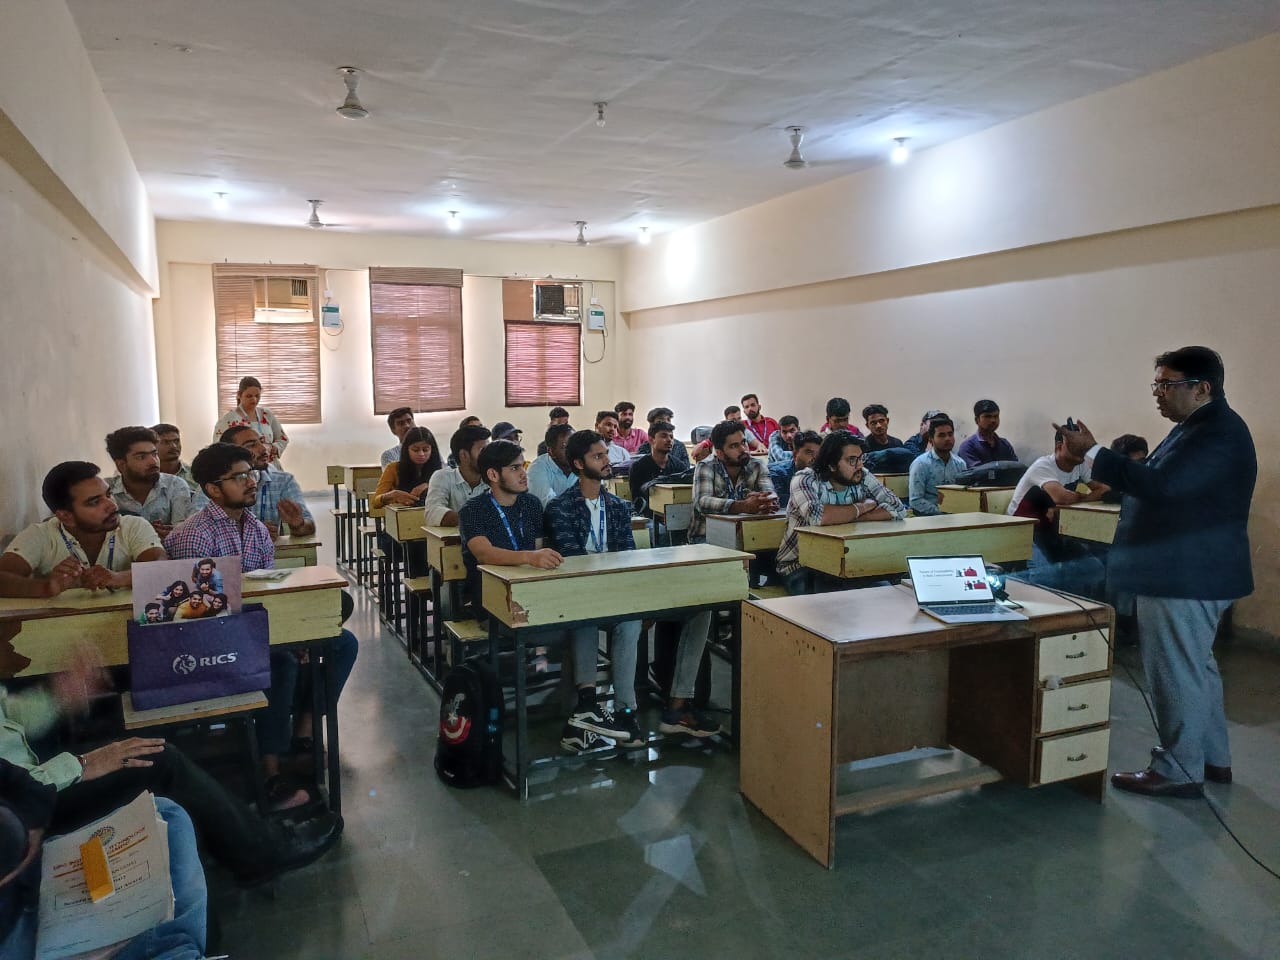 Workshop Conducted by RICS for Civil and Mechanical Engineering Students